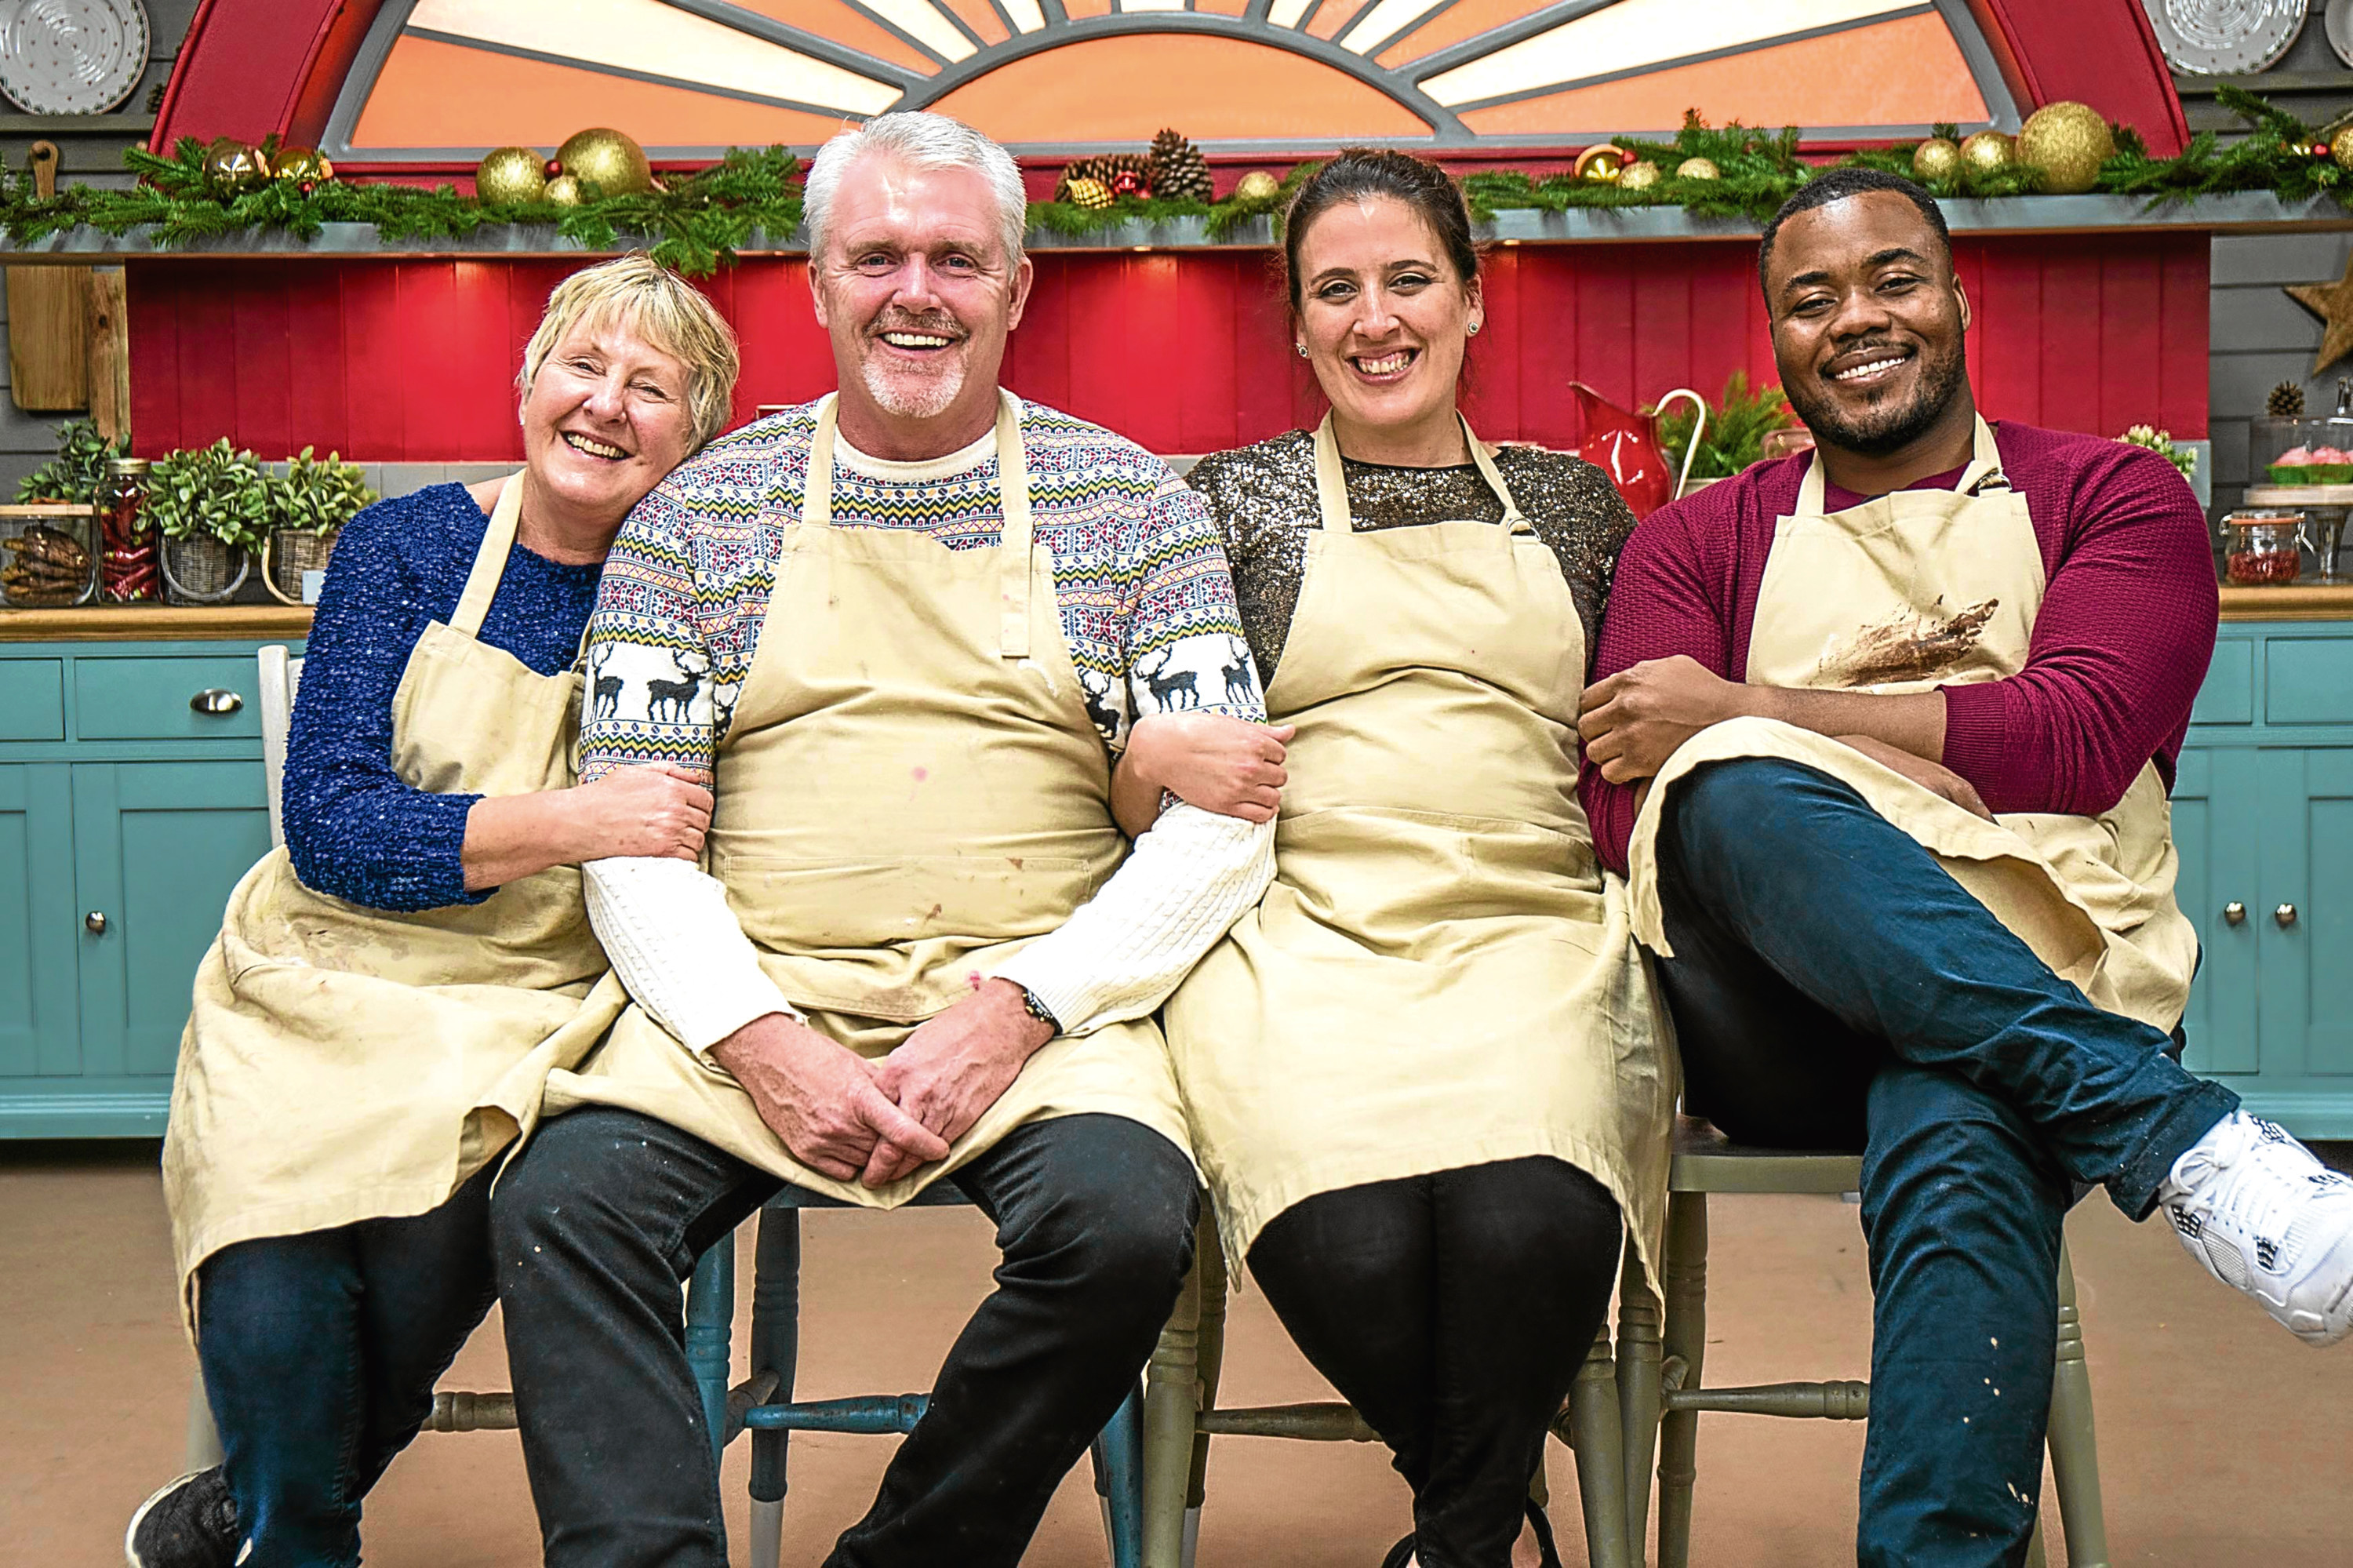 The Great British Bake Off: Xmas Special - (Val, Paul, Becca and Selasi) (Channel 4)